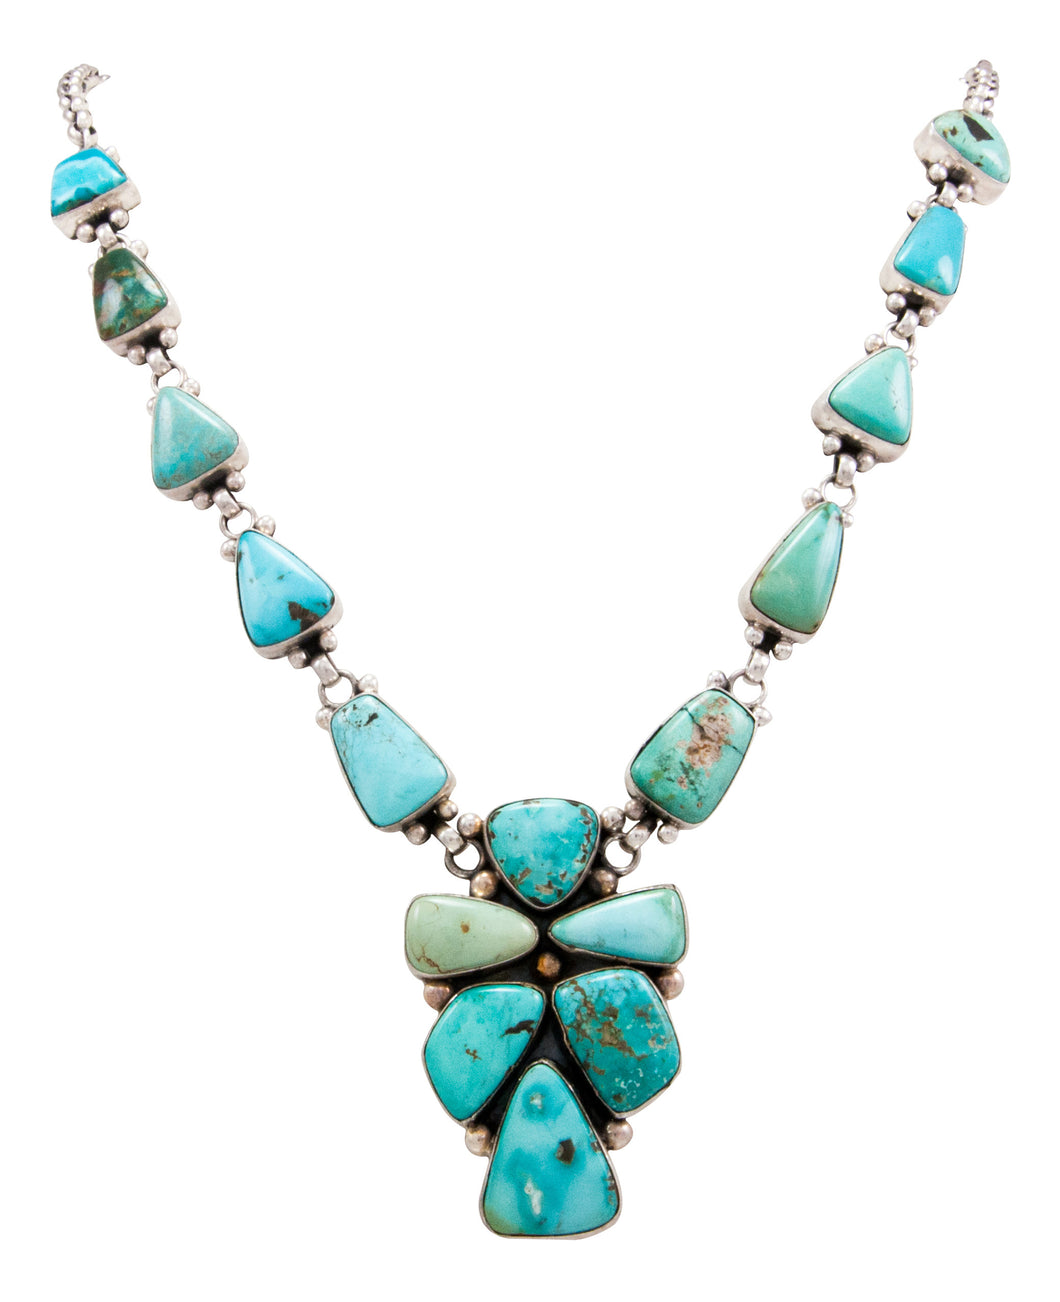 Navajo Native American Blue Moon Turquoise Necklace by Bea Tom SKU232568